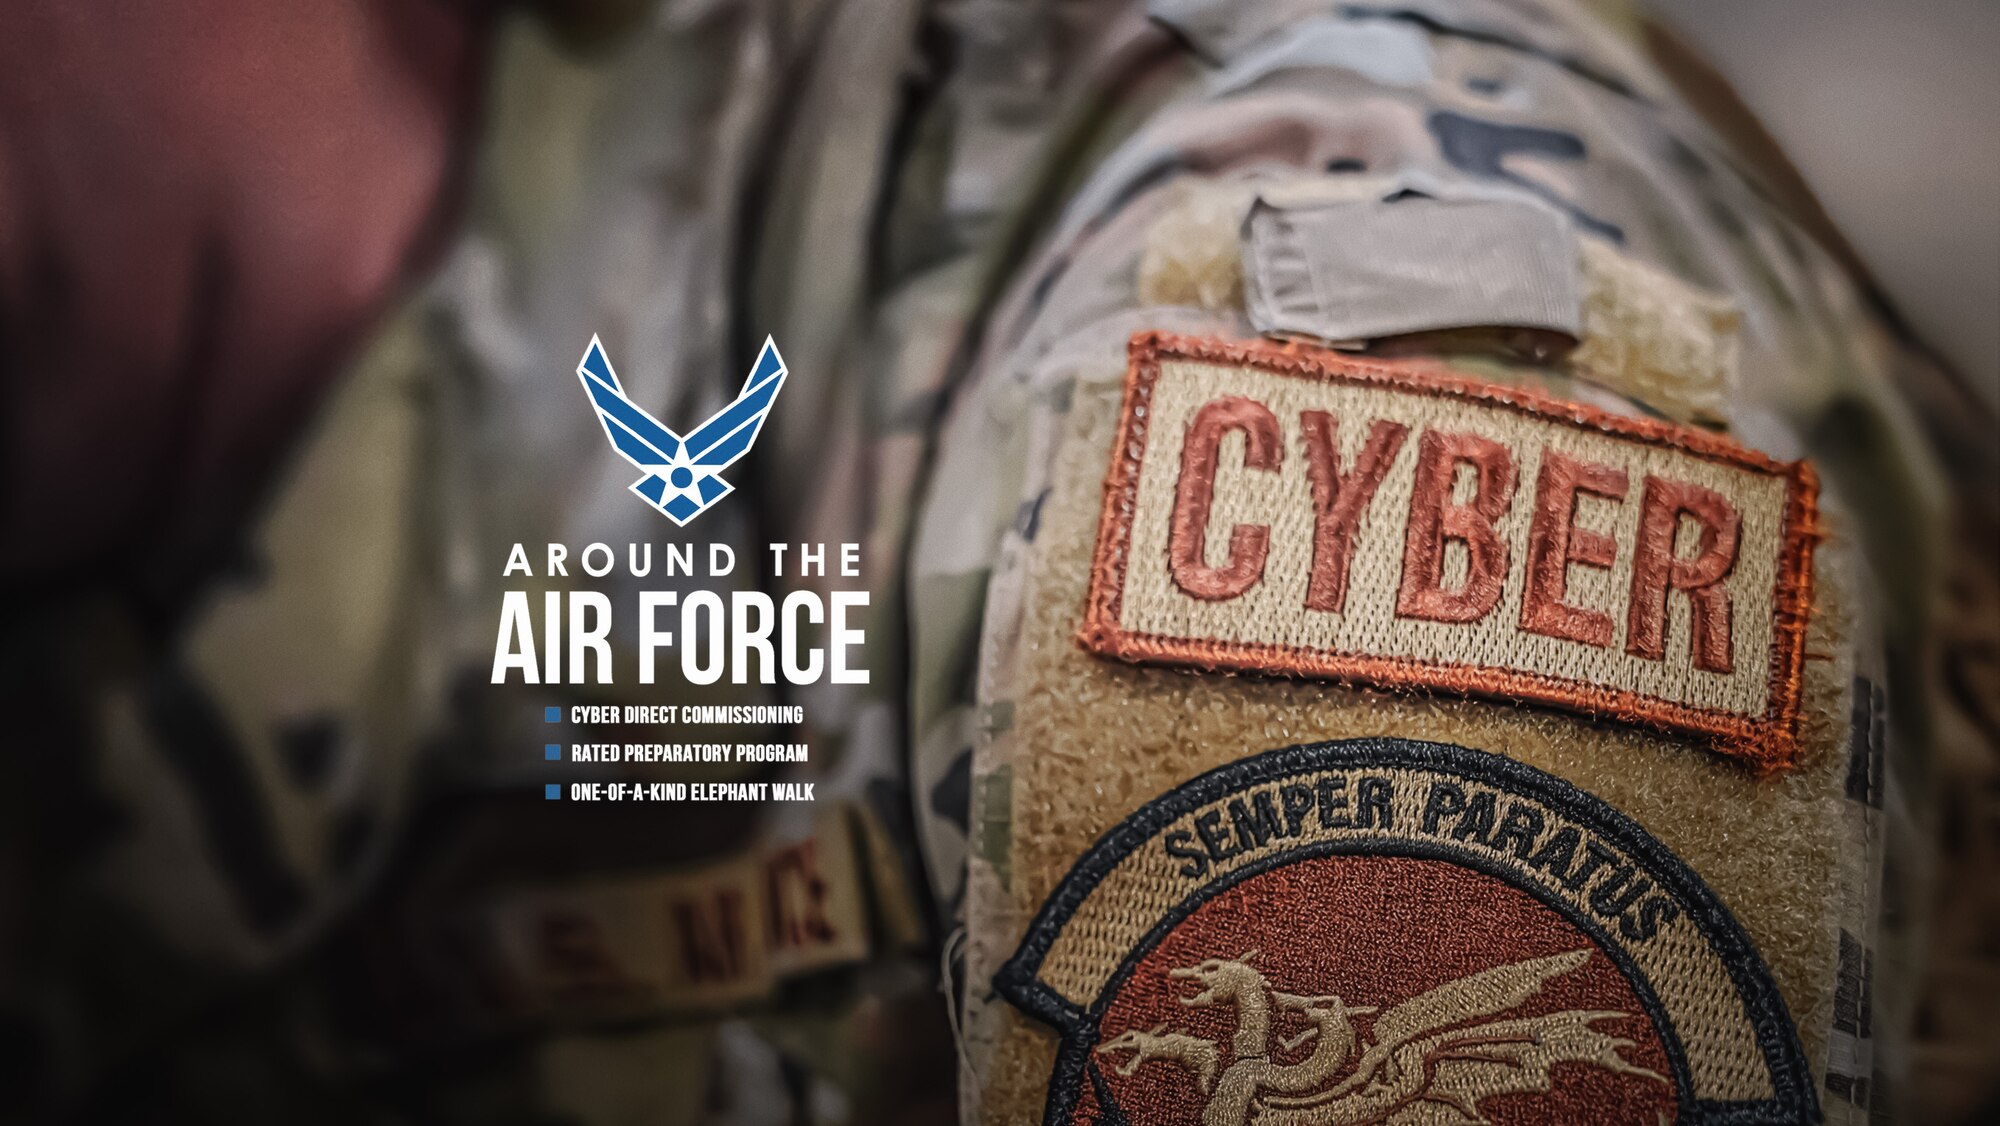 Around the Air Force Cyber Direct Commissioning, Rated Preparatory